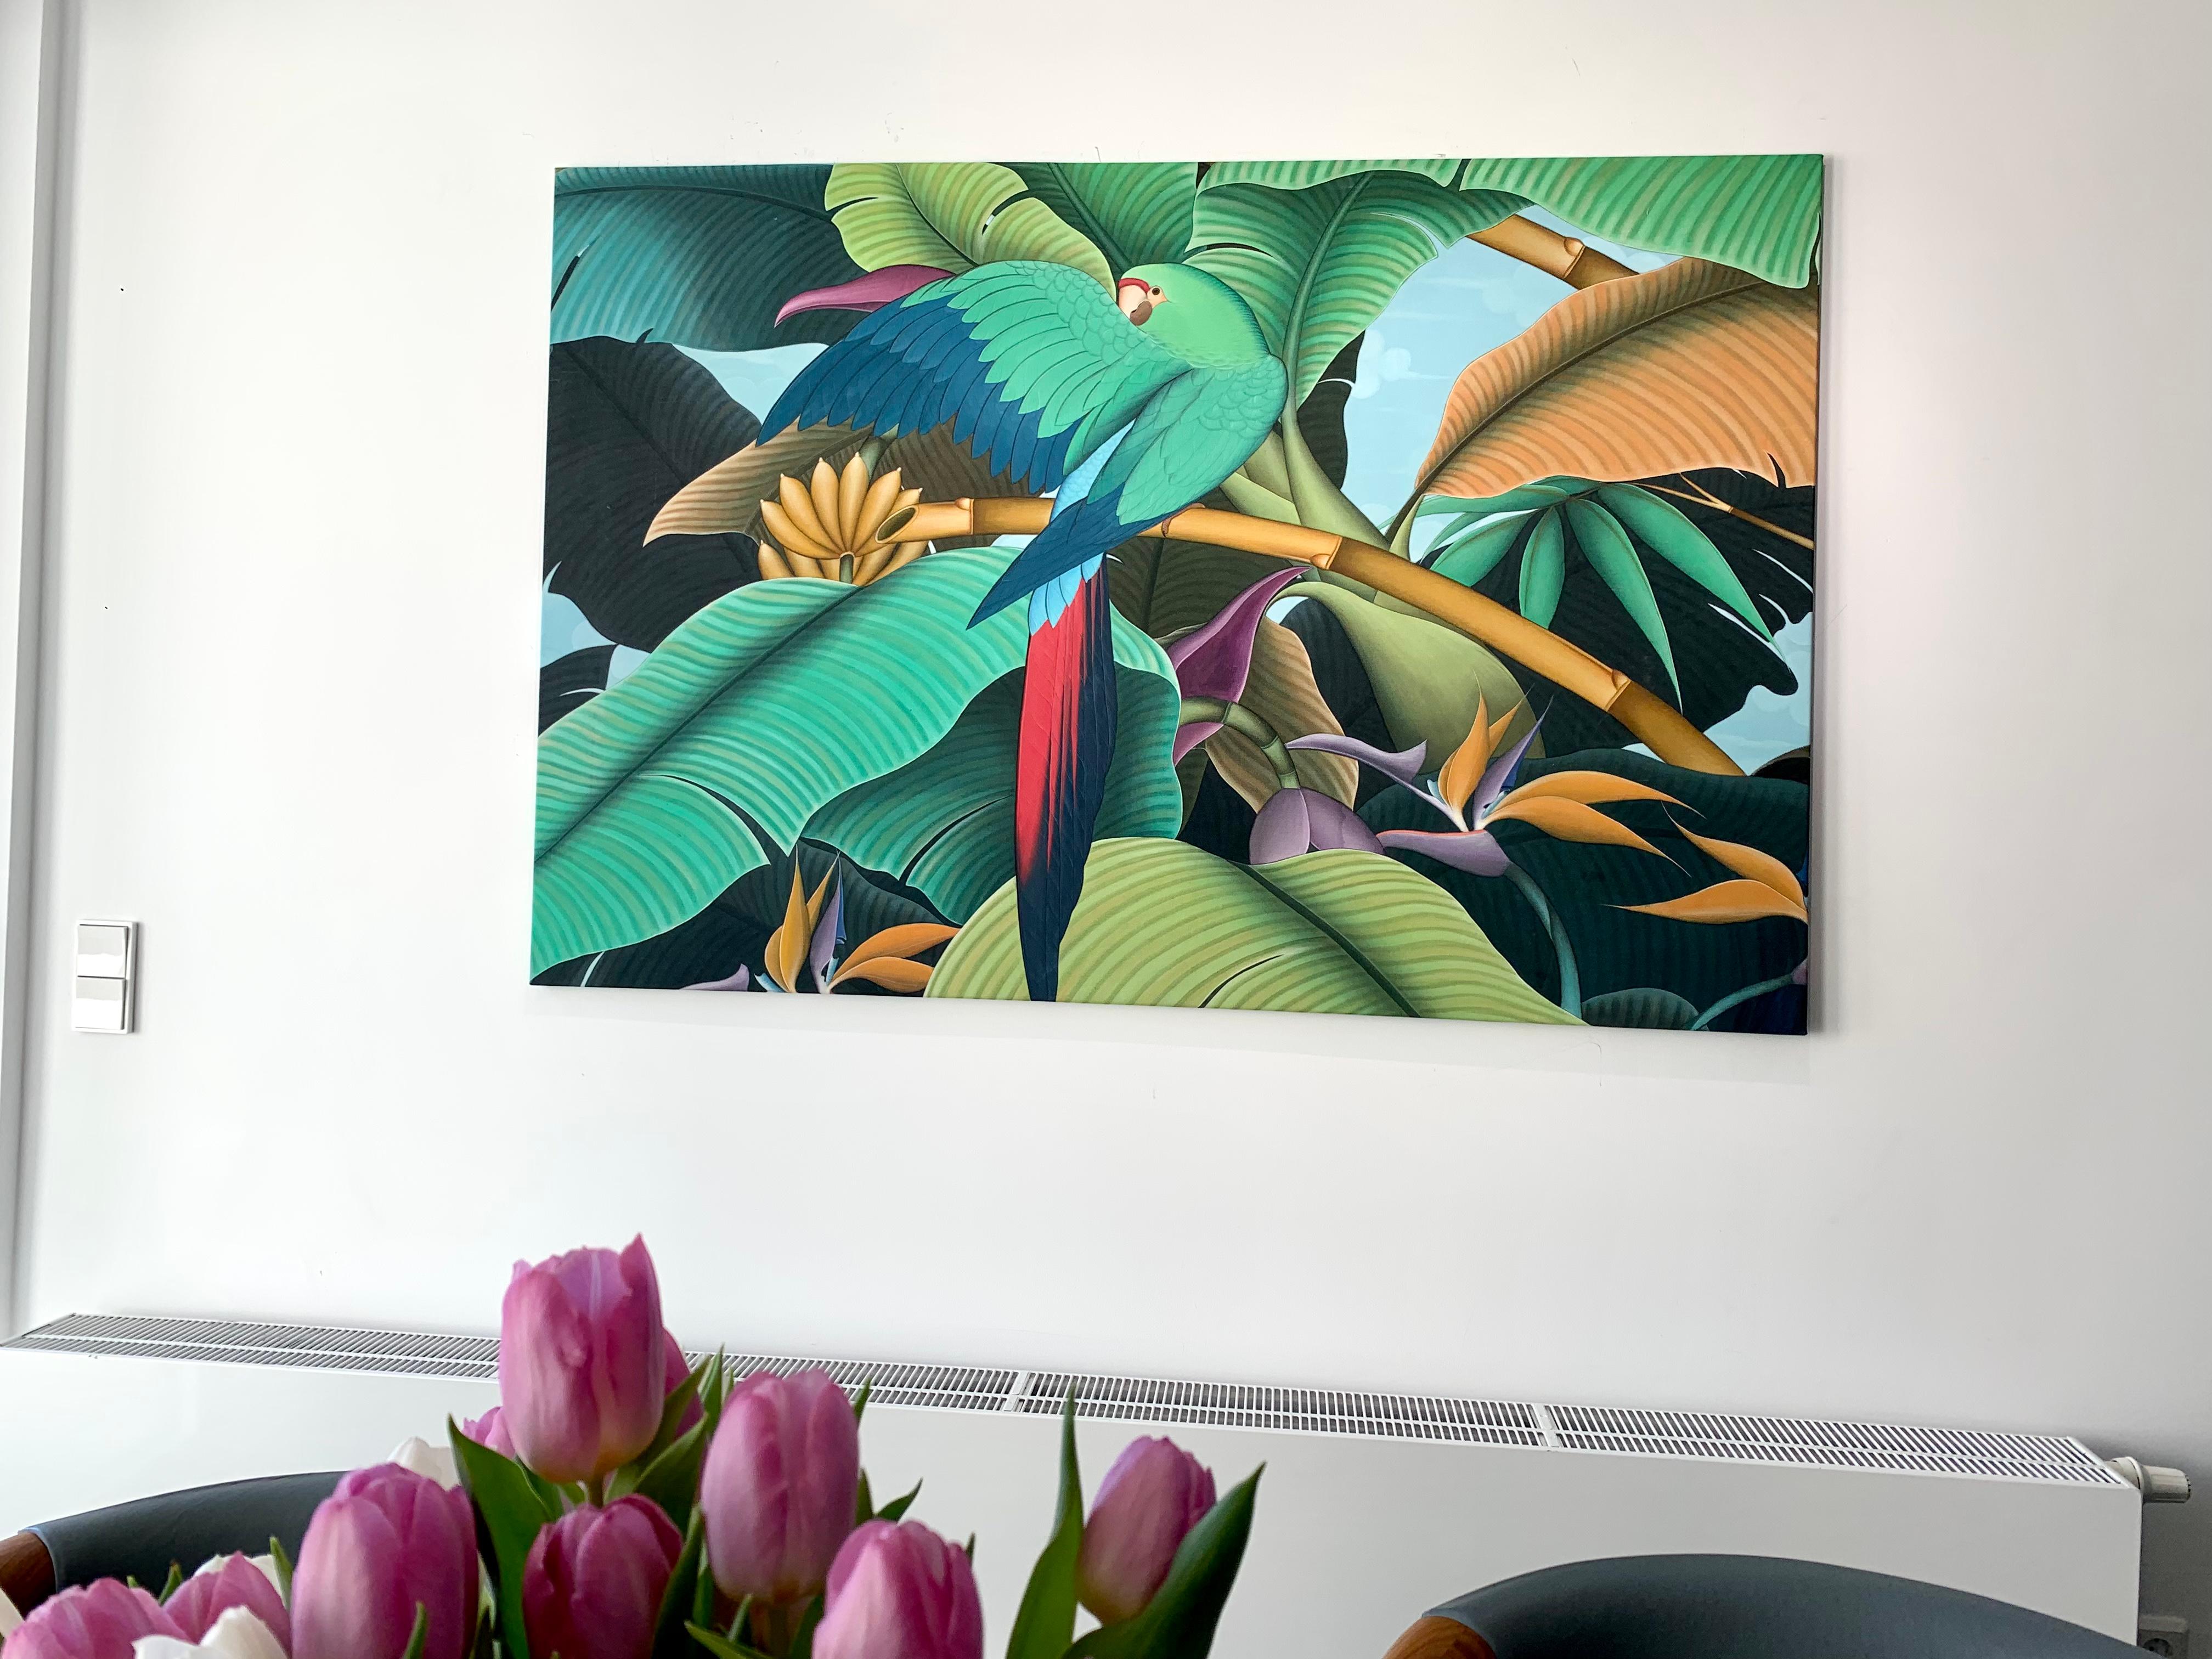 This is a beautiful painting of one big parrot sitting on a tree in the jungle. This original painting is elegant and a statement piece.
Contemporary painting full of details and colors, inspired by beautiful parts of nature that need more